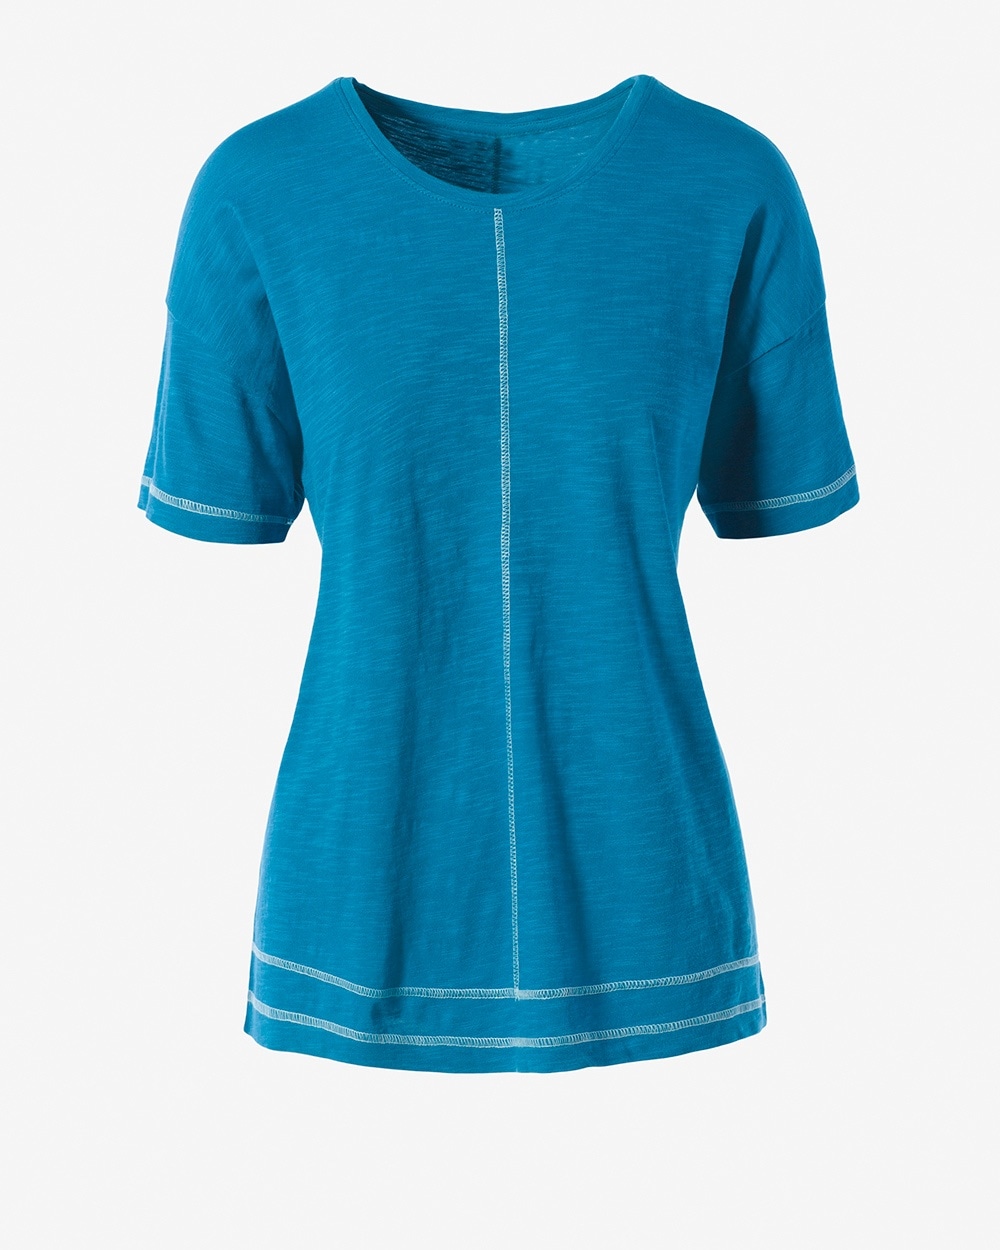 Weekends Soft Washed Scoop-Neck Tee